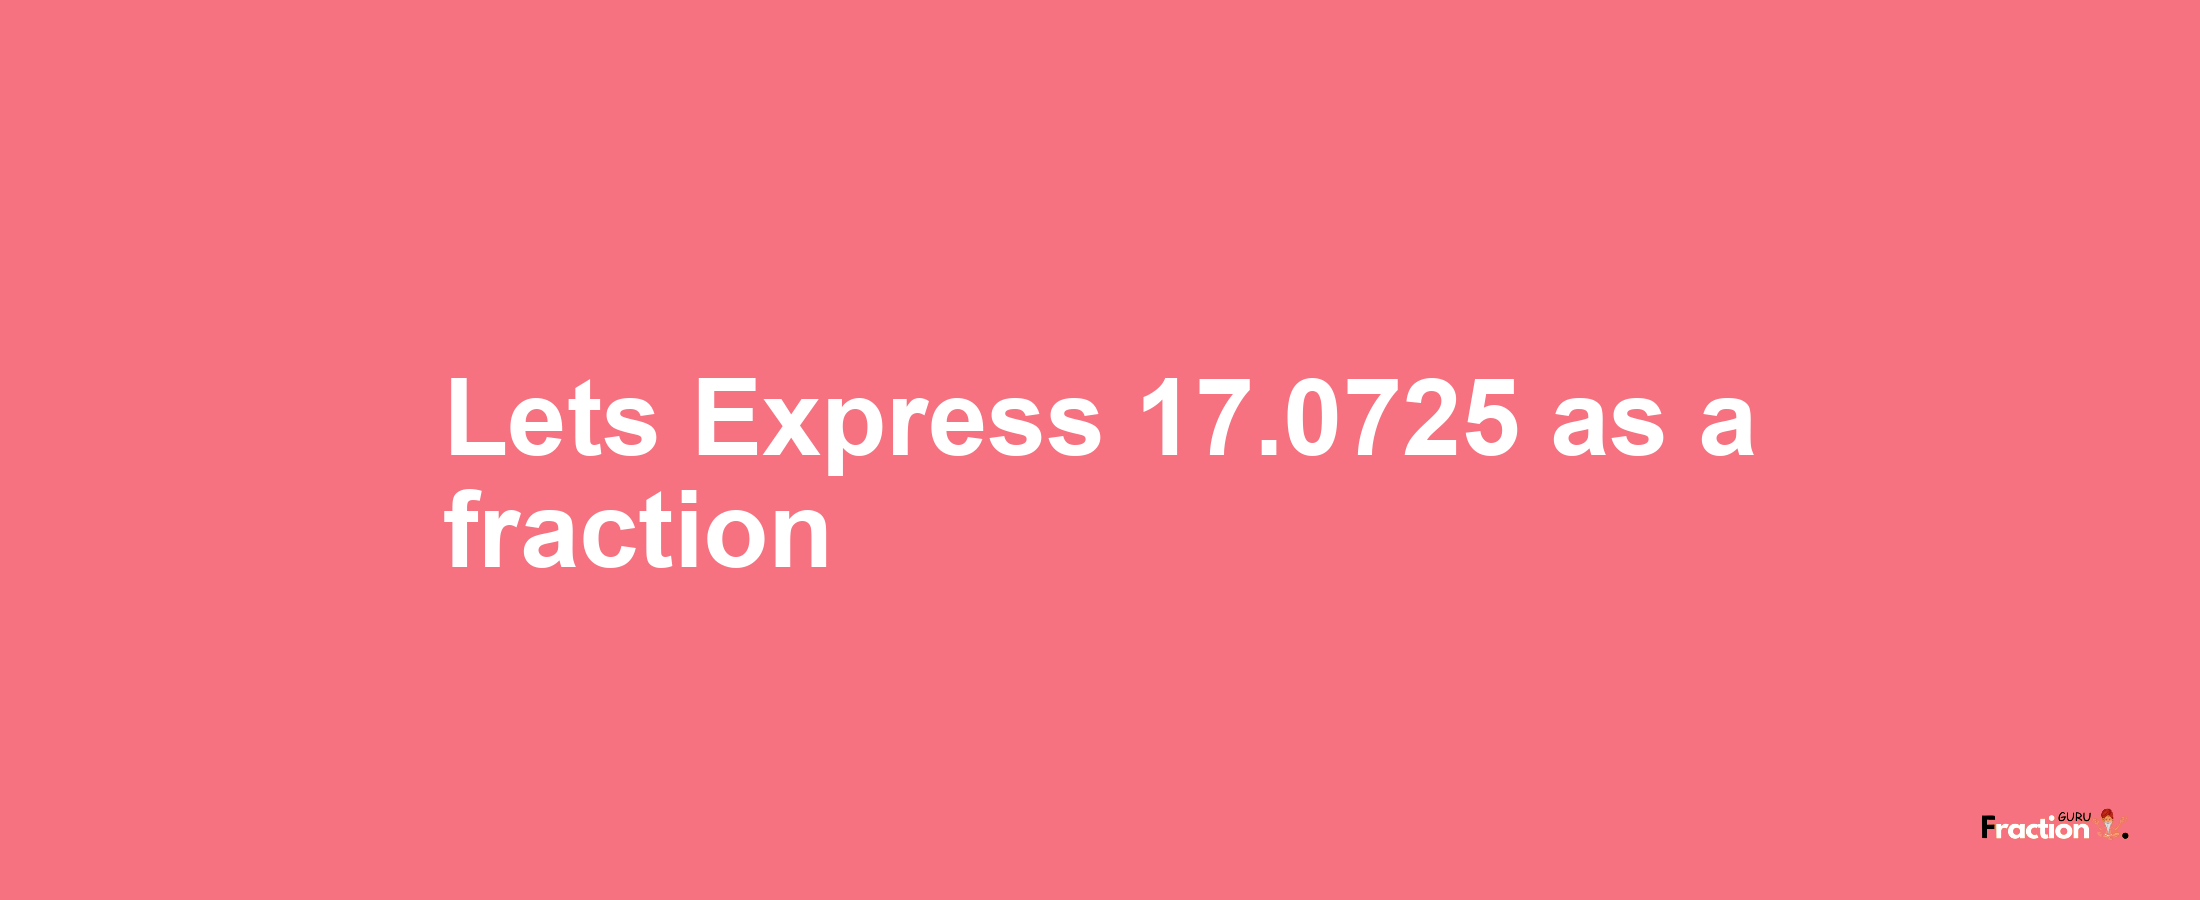 Lets Express 17.0725 as afraction